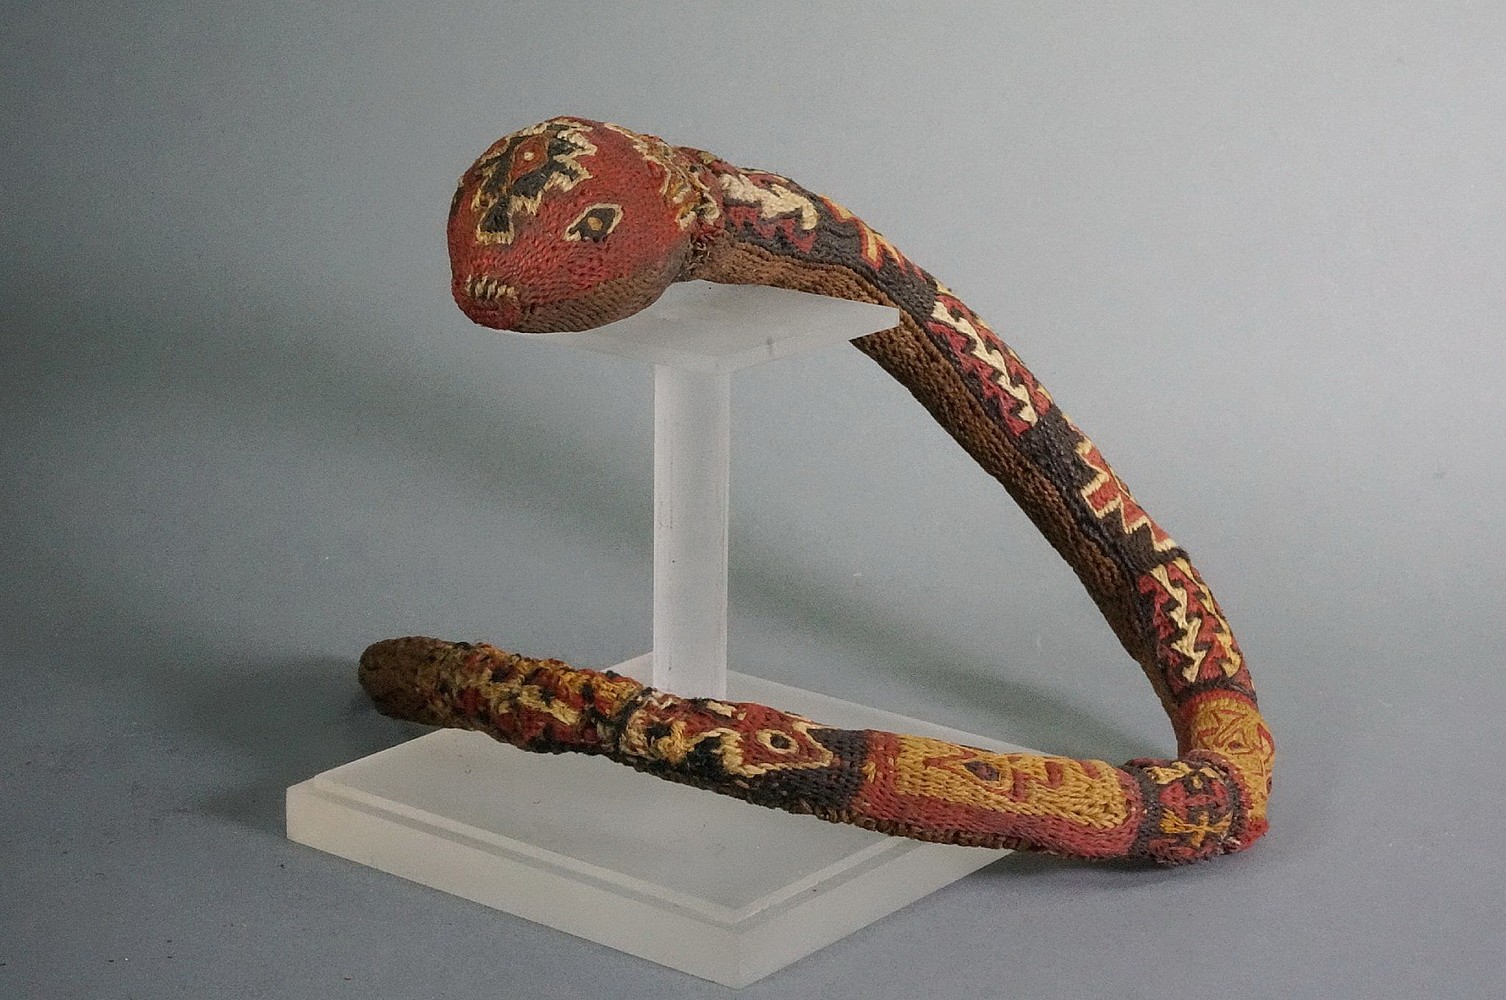 Peru, Wari three dimensional coil woven snake dance wand
Shamans use dance wands hypnotize their attendants.   This wand has 6 different patterns on its back and a solid brown underside.  The tip has a 3" section of woven hemp which appears to be poisonous. There are many poisonous snakes in Peru including the dangerous Bushmaster.   Formerly in the collection of Justin and Barbara Kerr, acquired from Alan Lapiner in 1967.
Media: Textile
Dimensions: Length: 19 1/2" x Diameter: 1 1/2" tapering to 3/8"
Price Upon Request
n7016